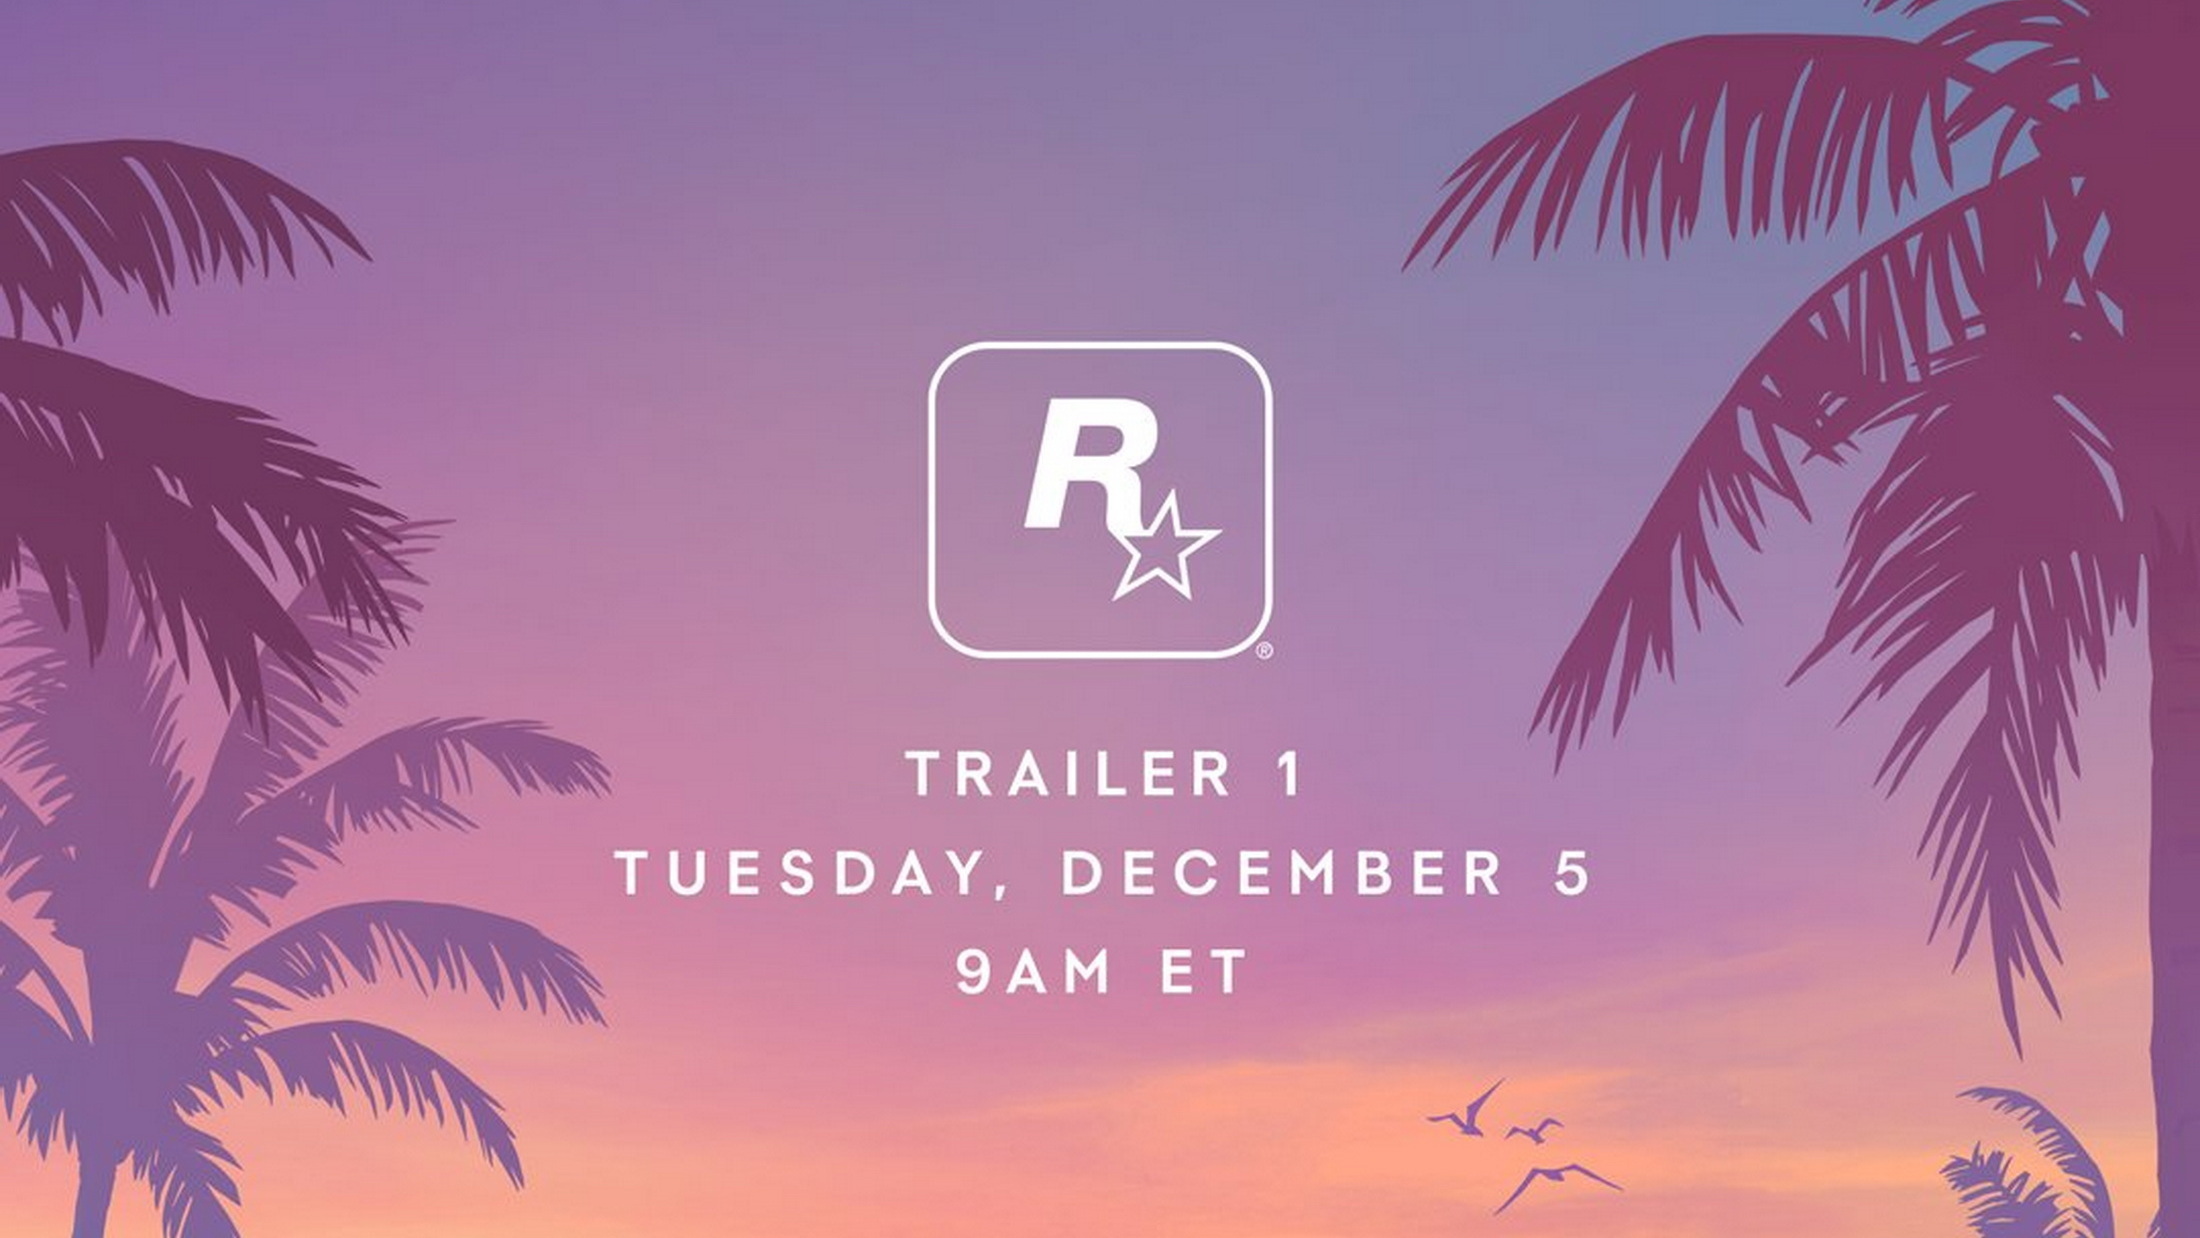 GTA 6 Leaks May Have Come From Rockstar Employee's Kid: Report